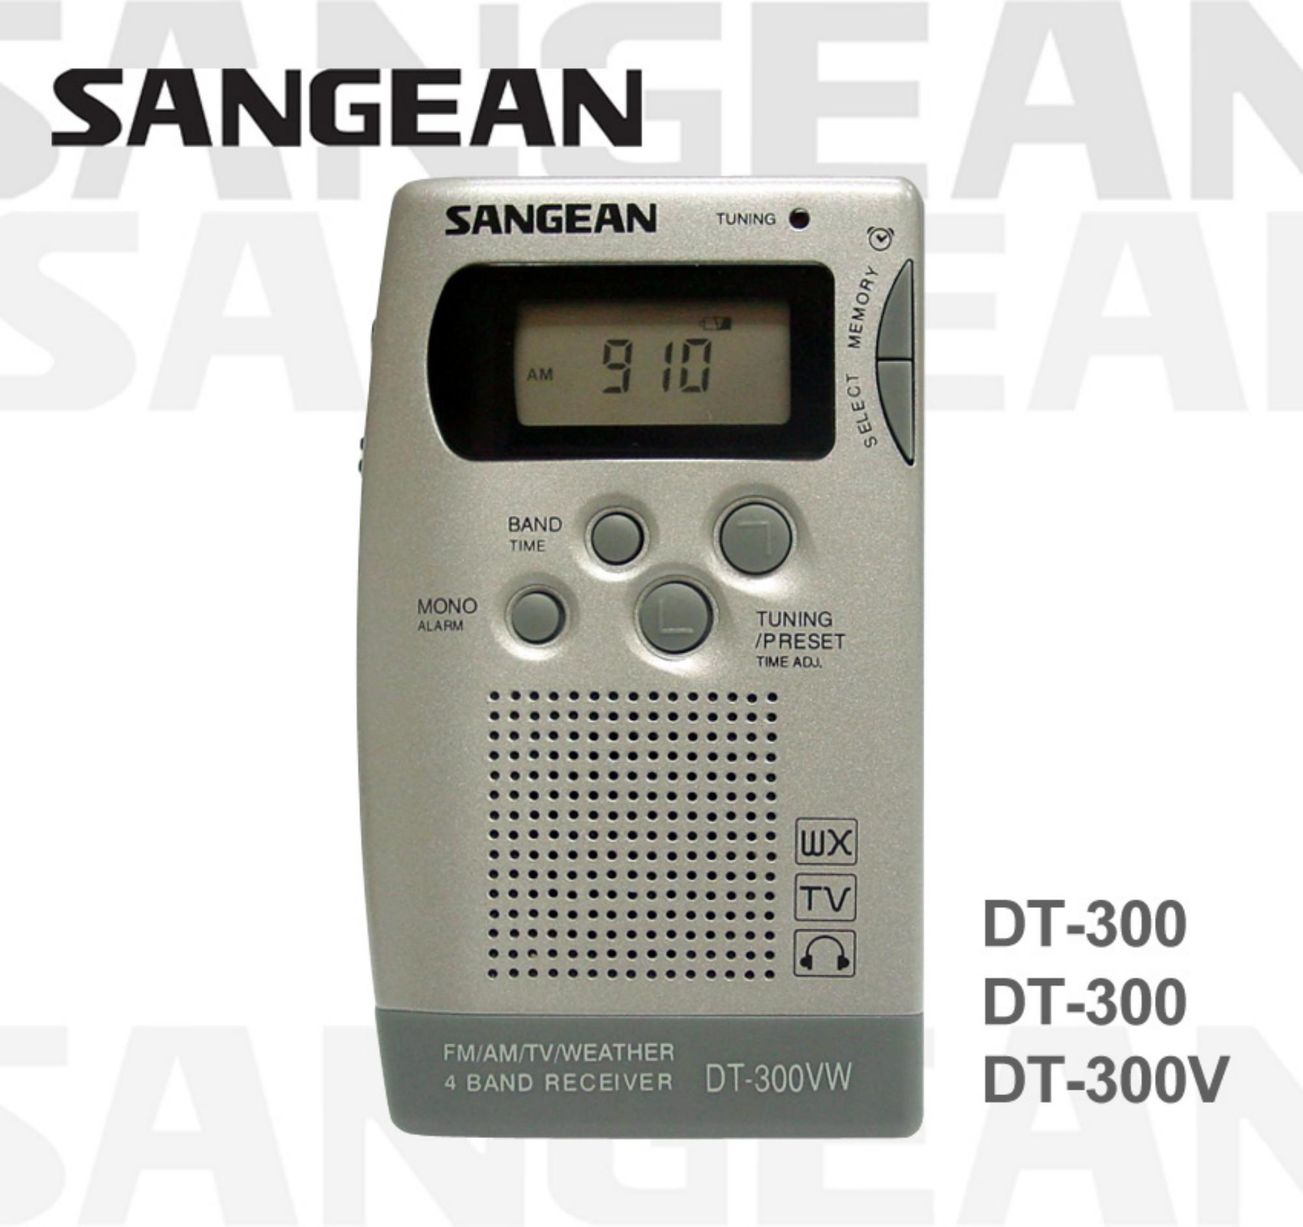 Sangean Electronics FM/AM/TV/WEATHER 4 Band Reviever Portable Radio User Manual